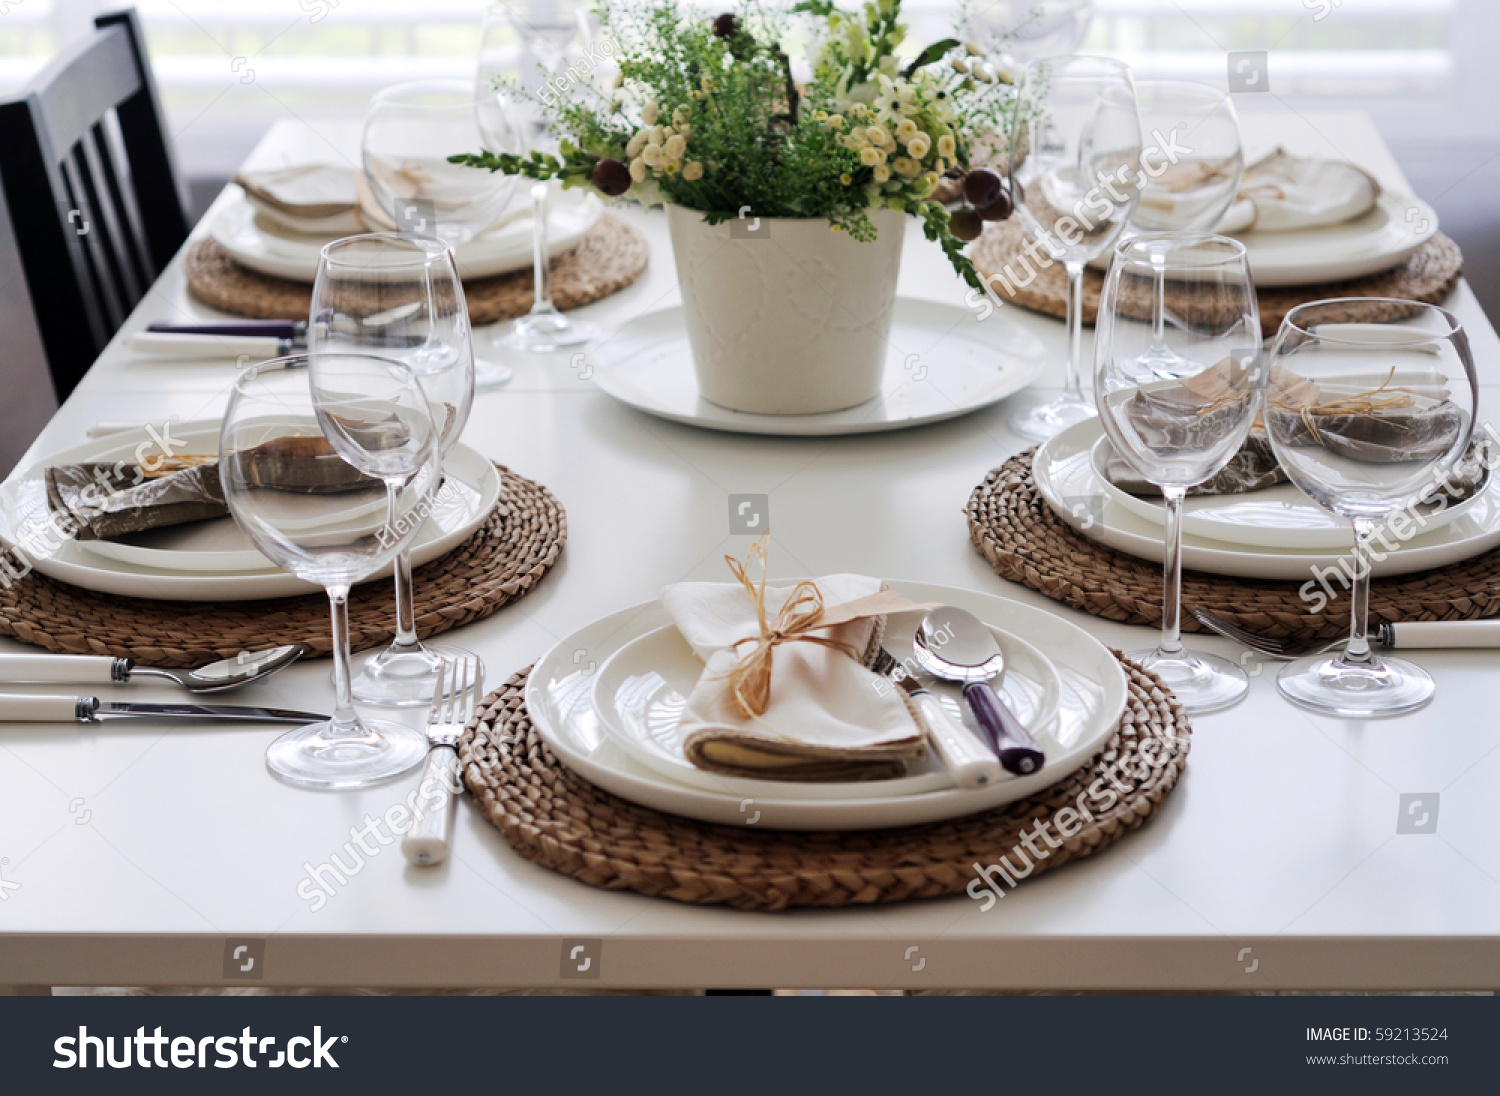 Summer Table Setting Lunch Stock Photo 59213524 - Shutterstock